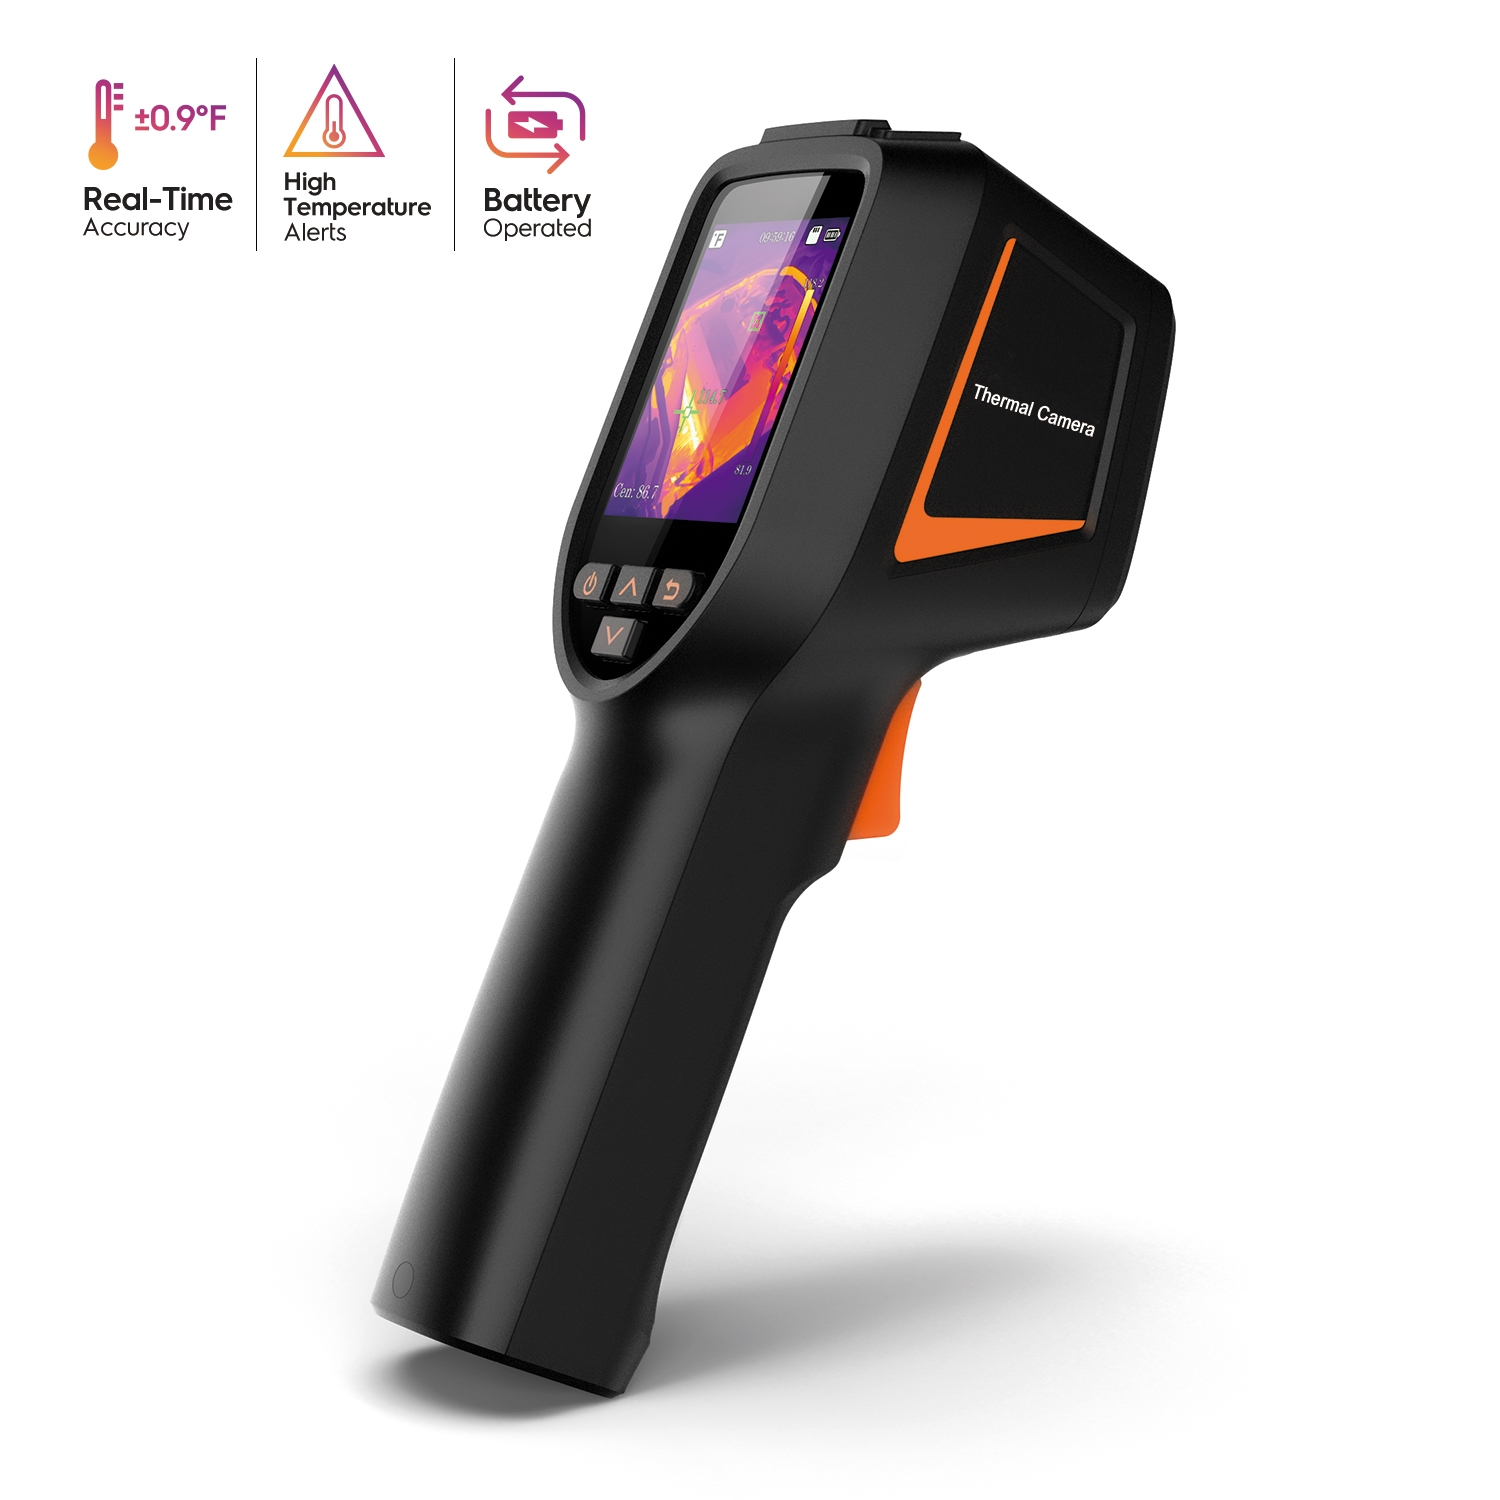 New Handheld Thermal Imaging Camera IR Infrared Thermometer Imager LCD Display 